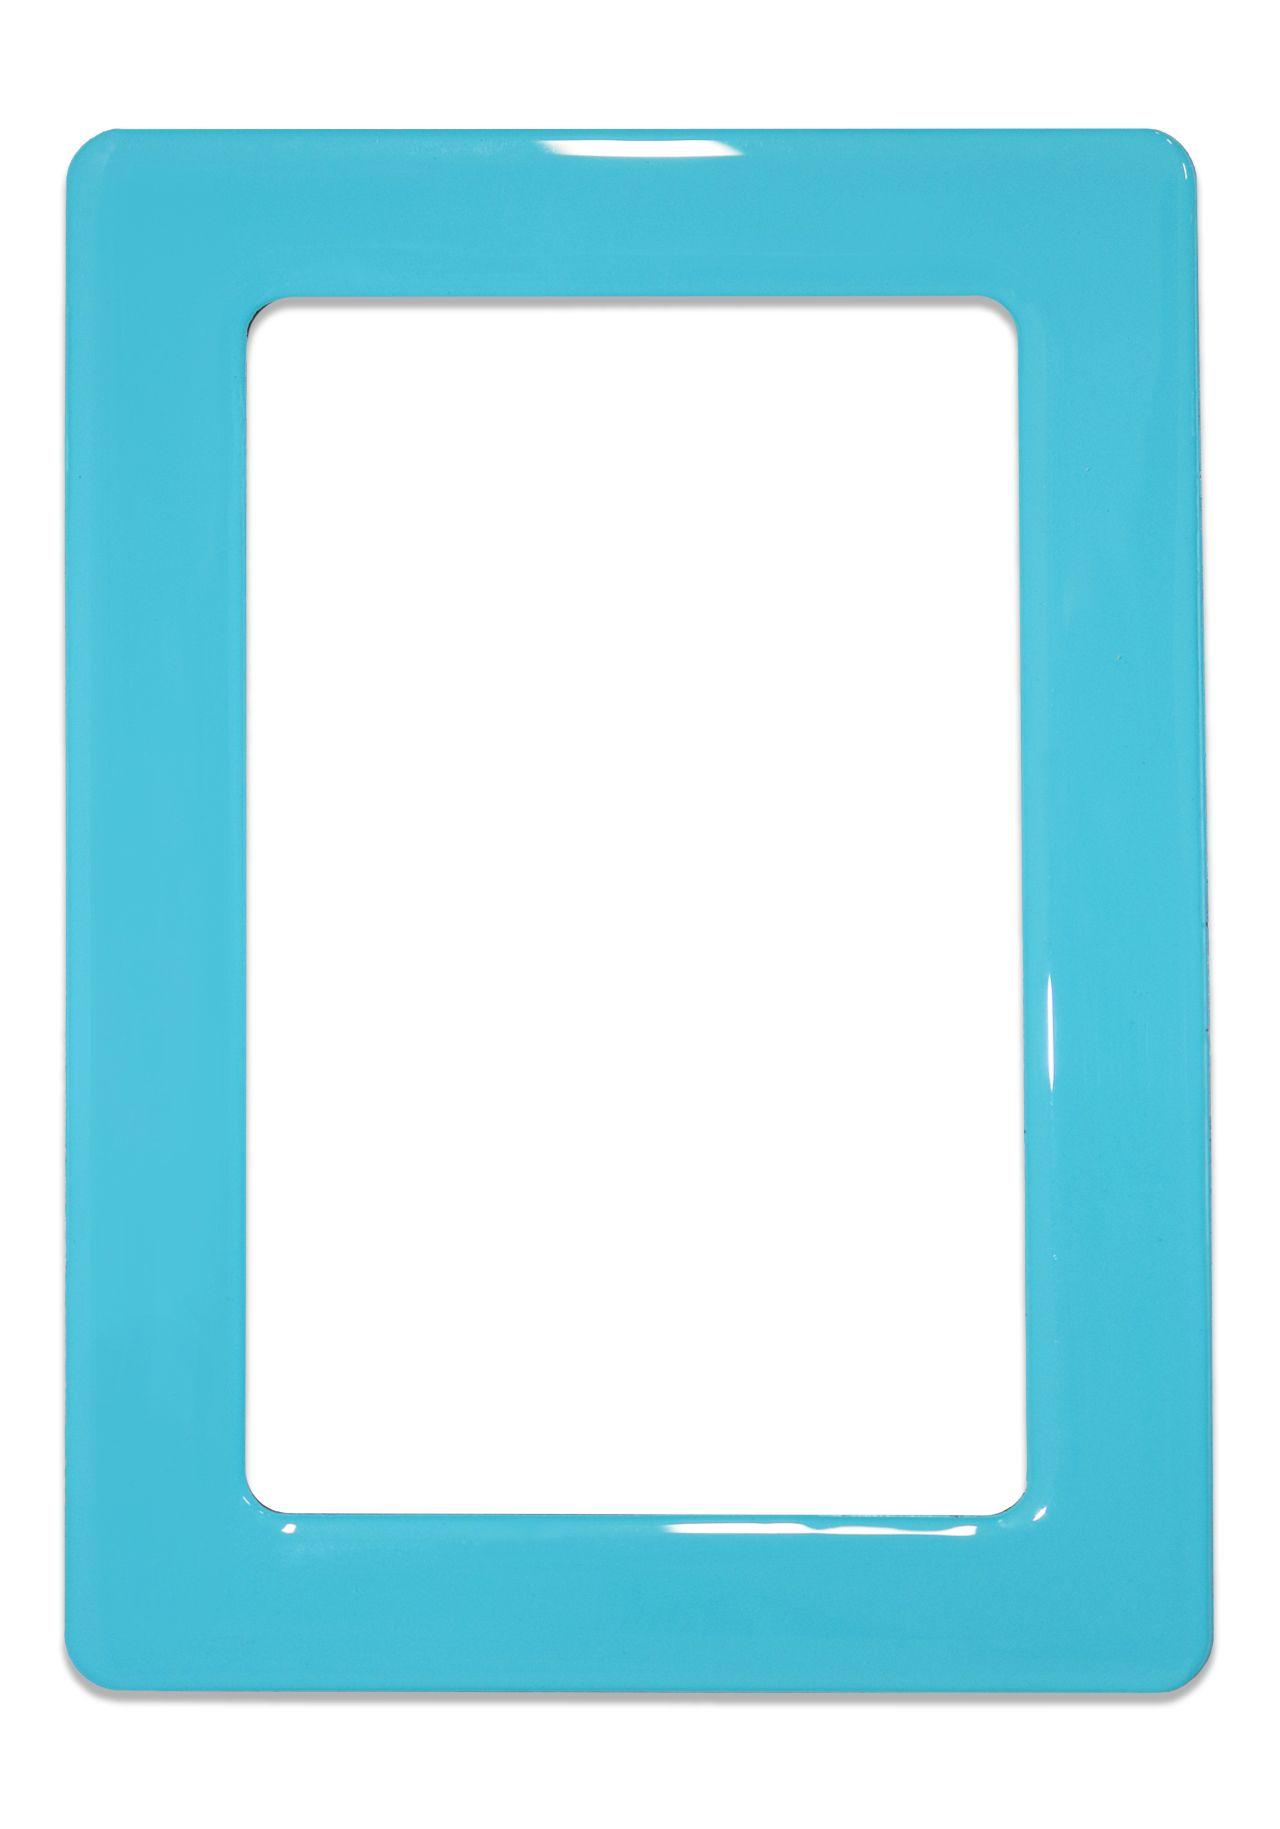 Magnetic self-adhesive frame size 12.3x8.1cm - light blue